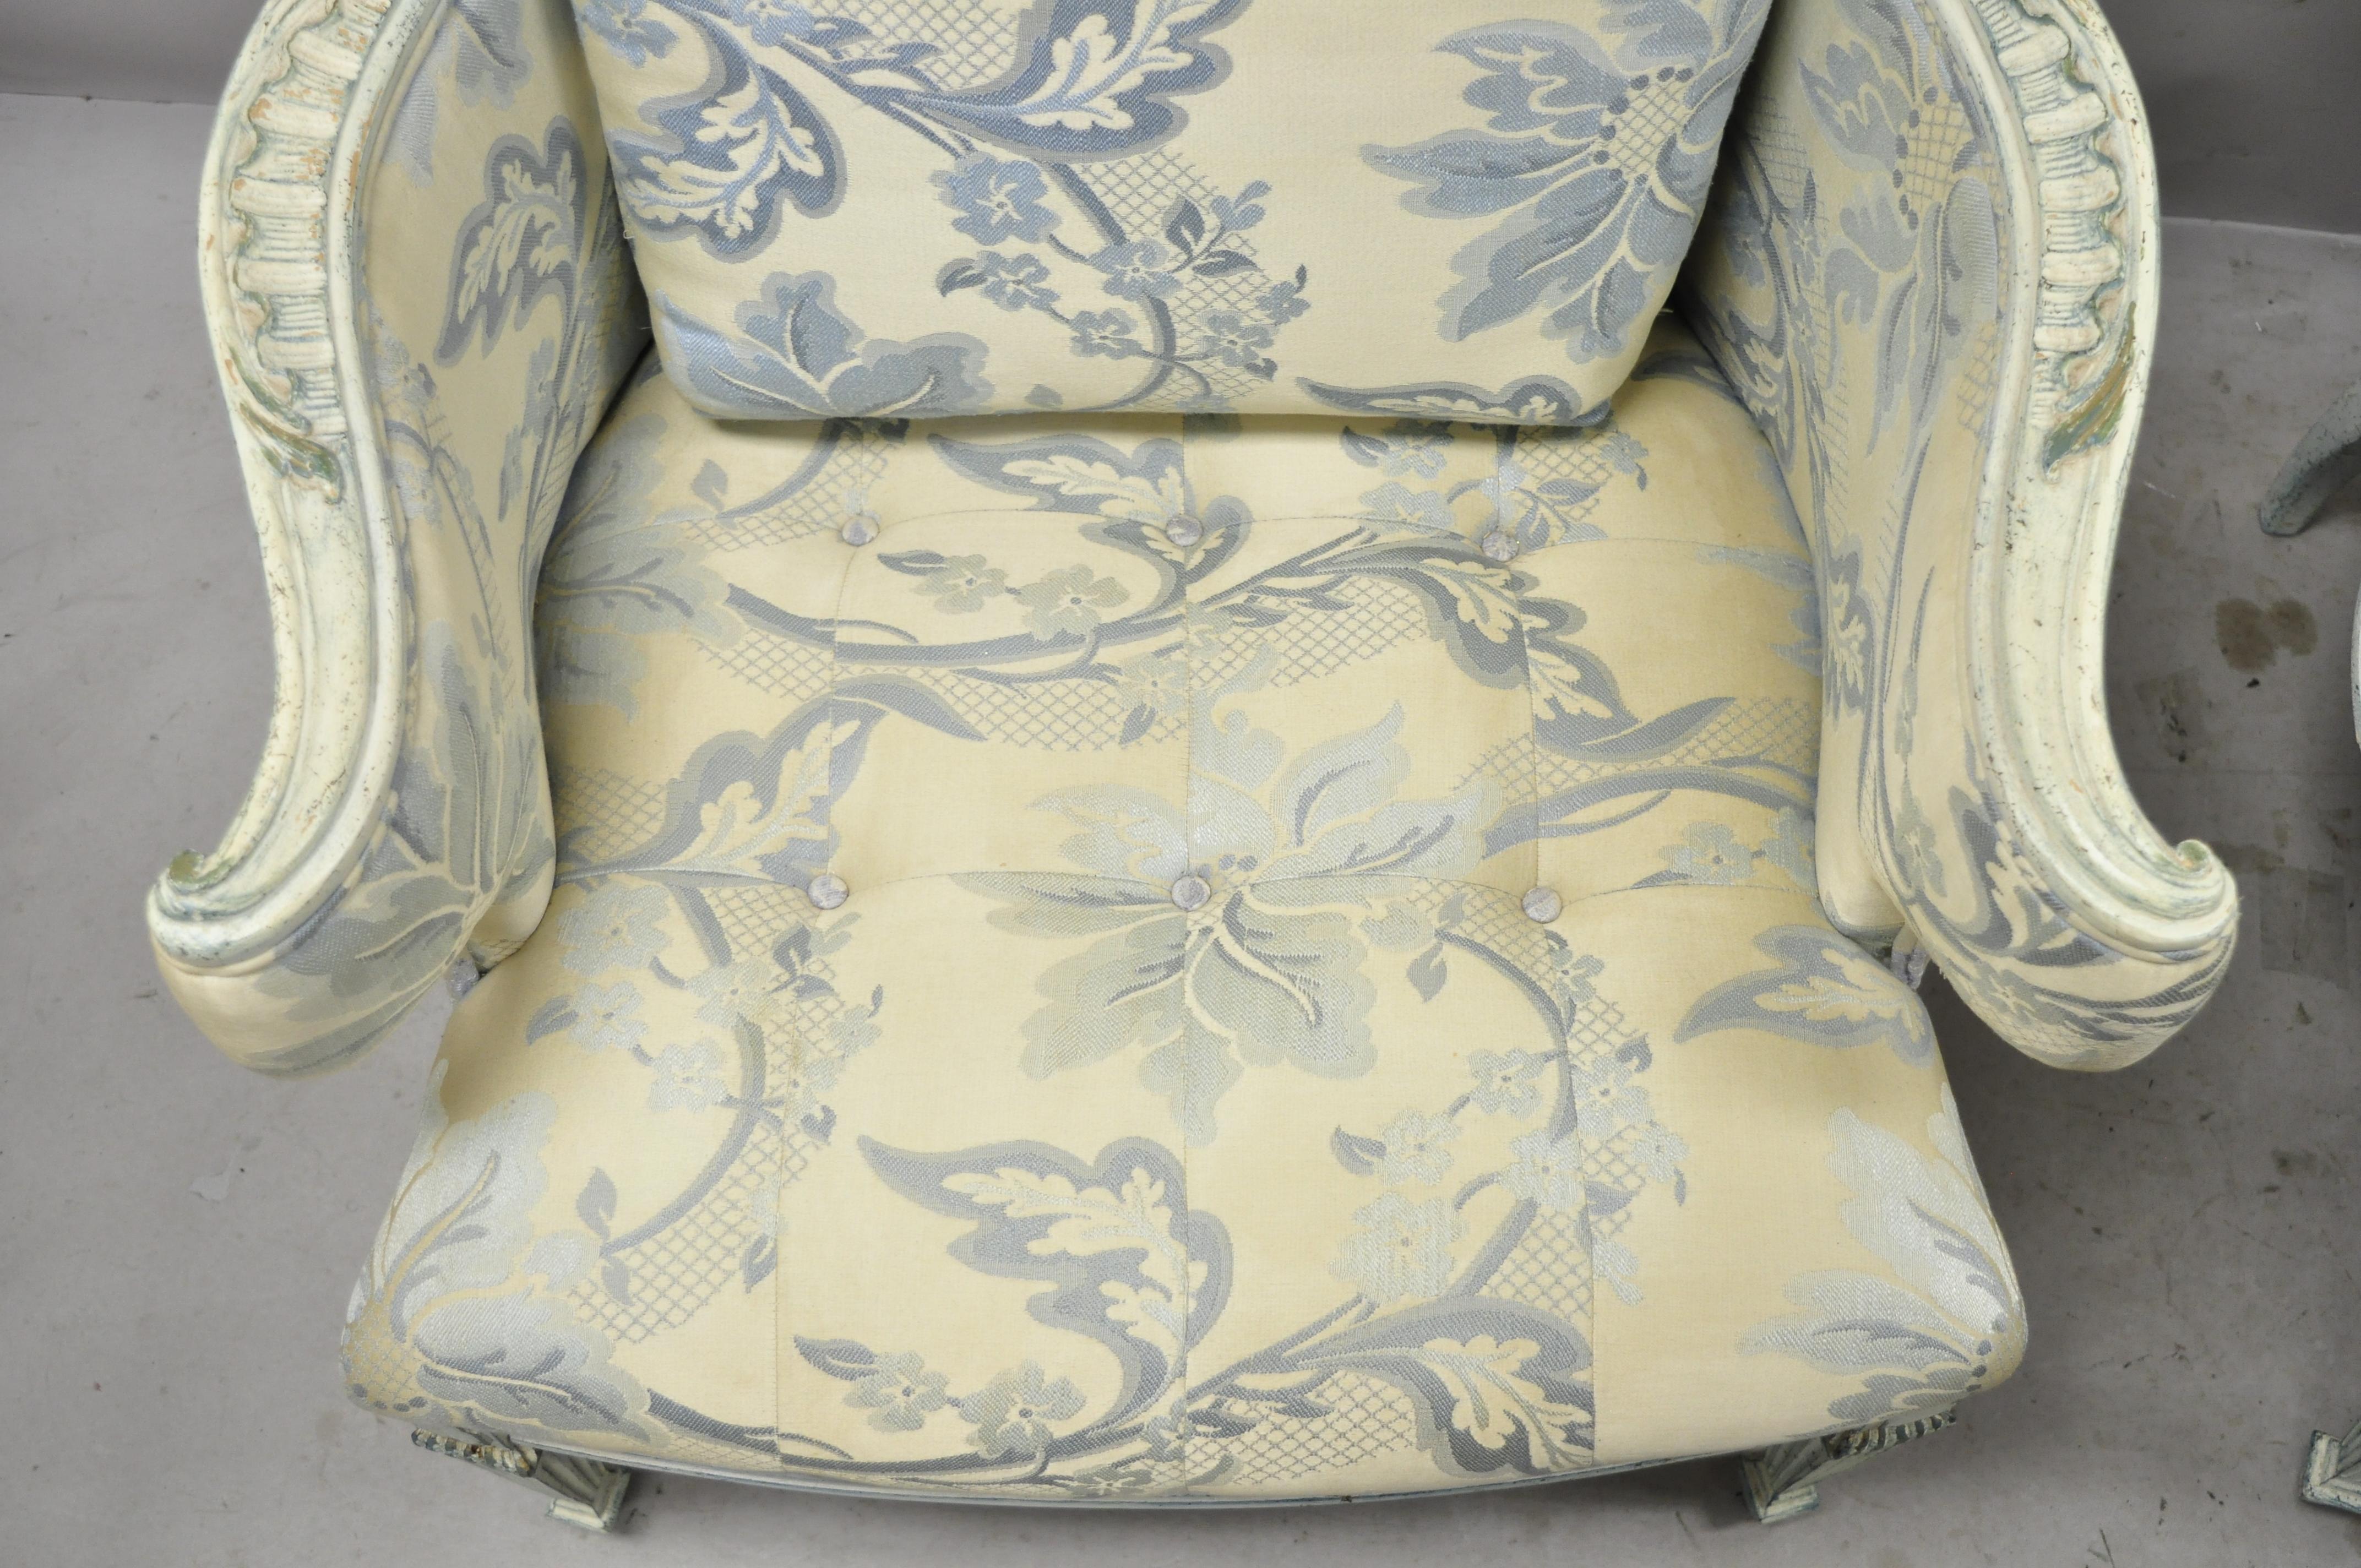 Vintage French Provincial Louis XVI Blue and Cream Painted Club Chairs, a Pair For Sale 1